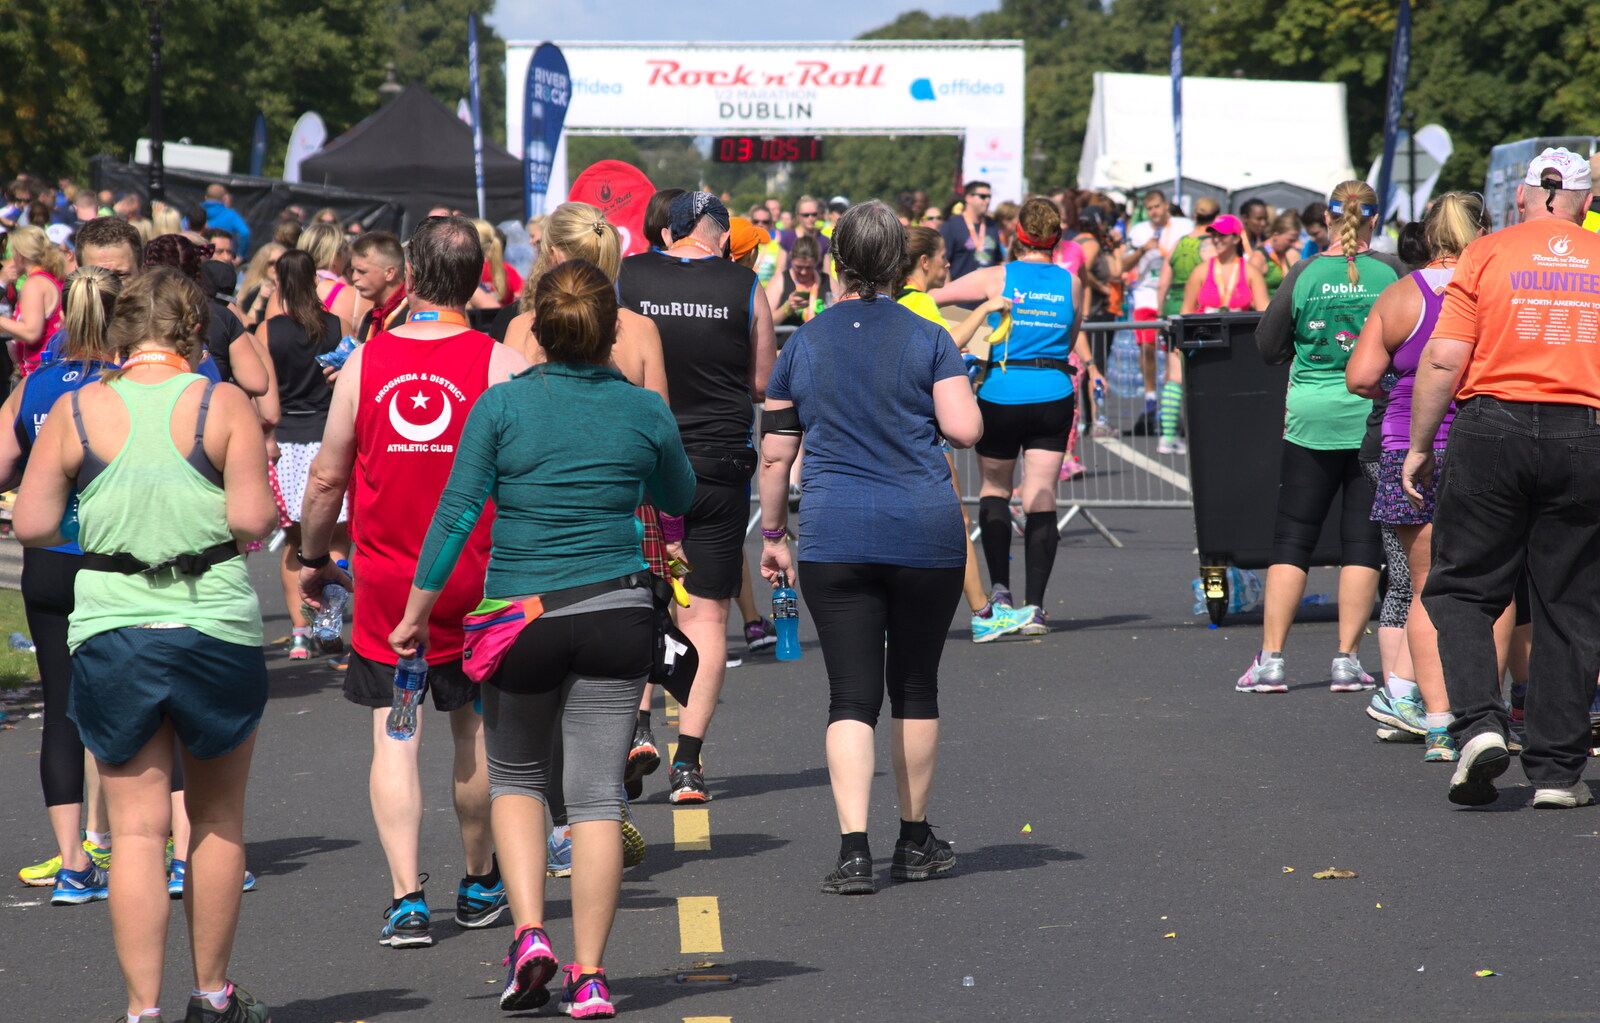 Runners at the finishing line from Isobel's Rock'n'Roll Half Marathon, Dublin, Ireland - 13th August 2017